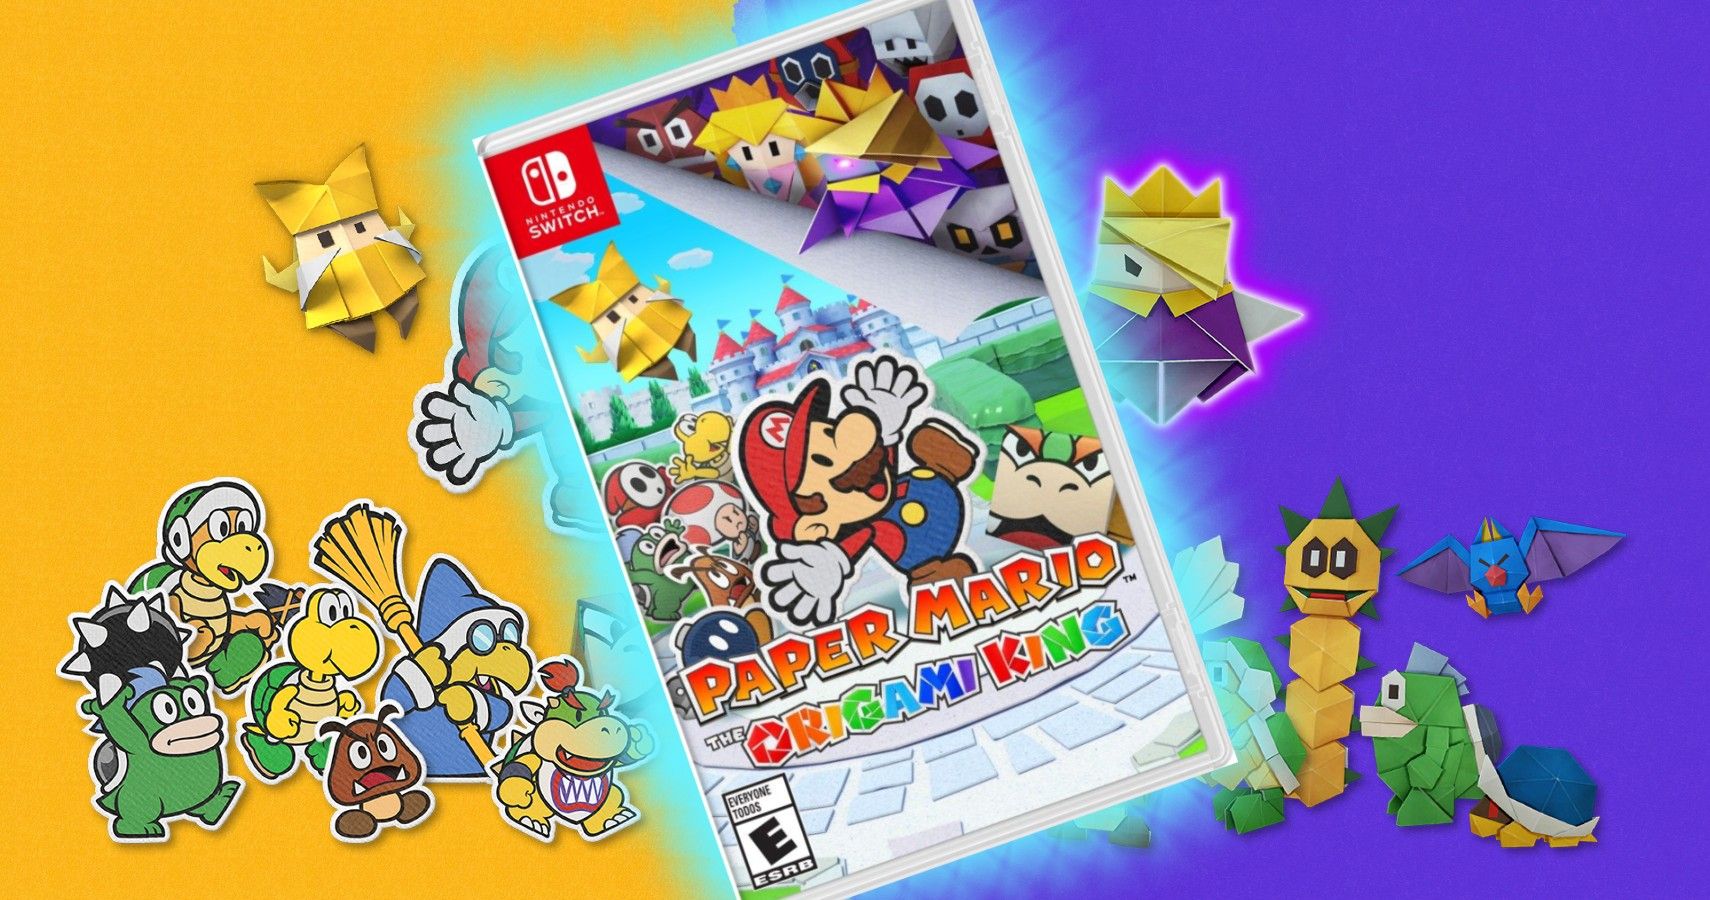 Heres Why You Should PreOrder A Physical Copy of Paper Mario The Origami King